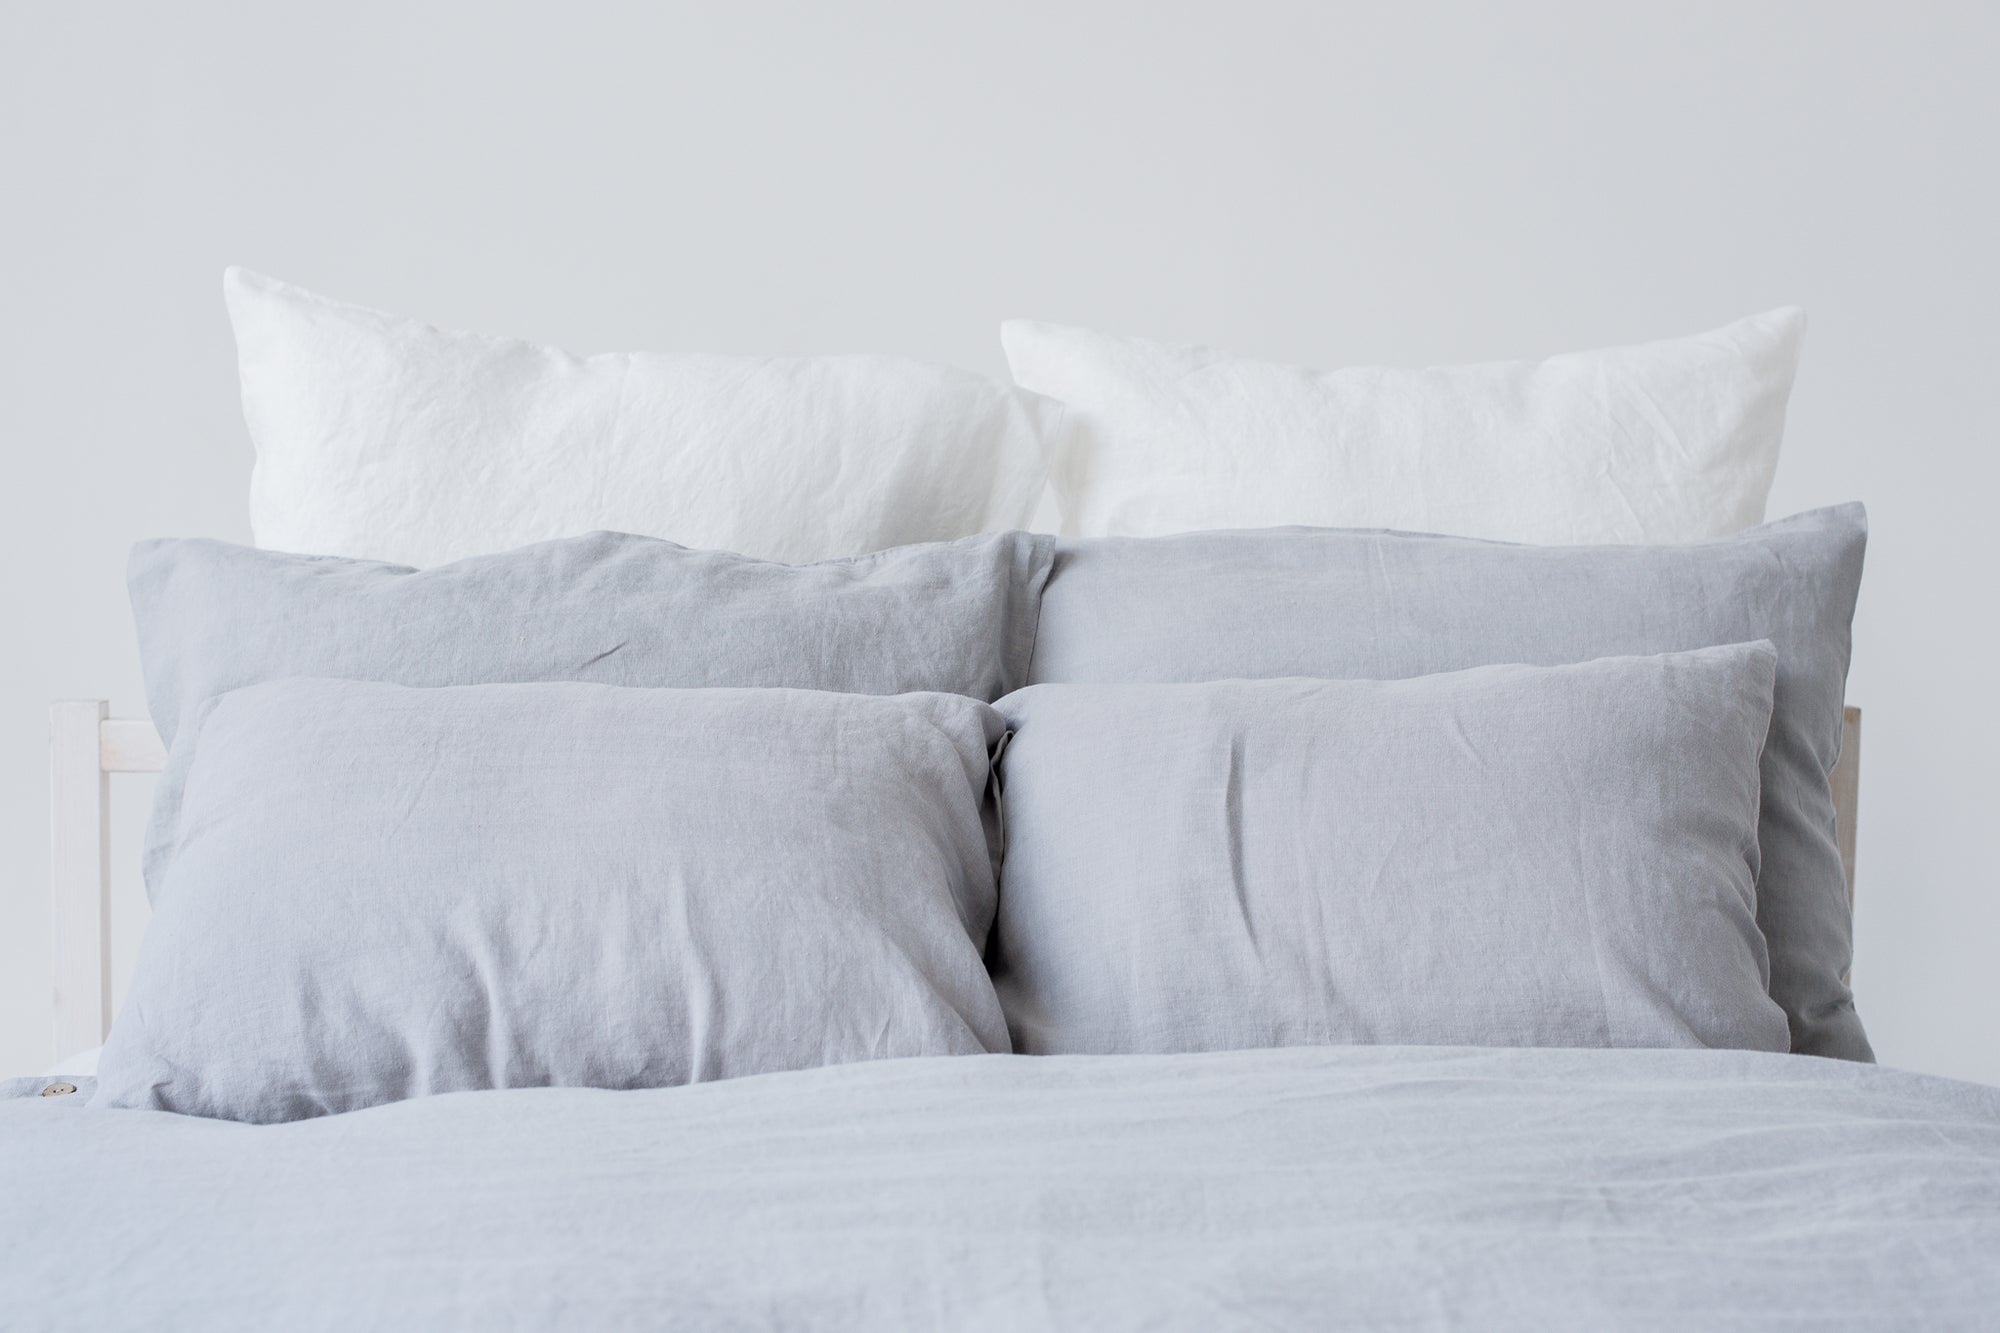 What is better for bedding: linen vs. cotton